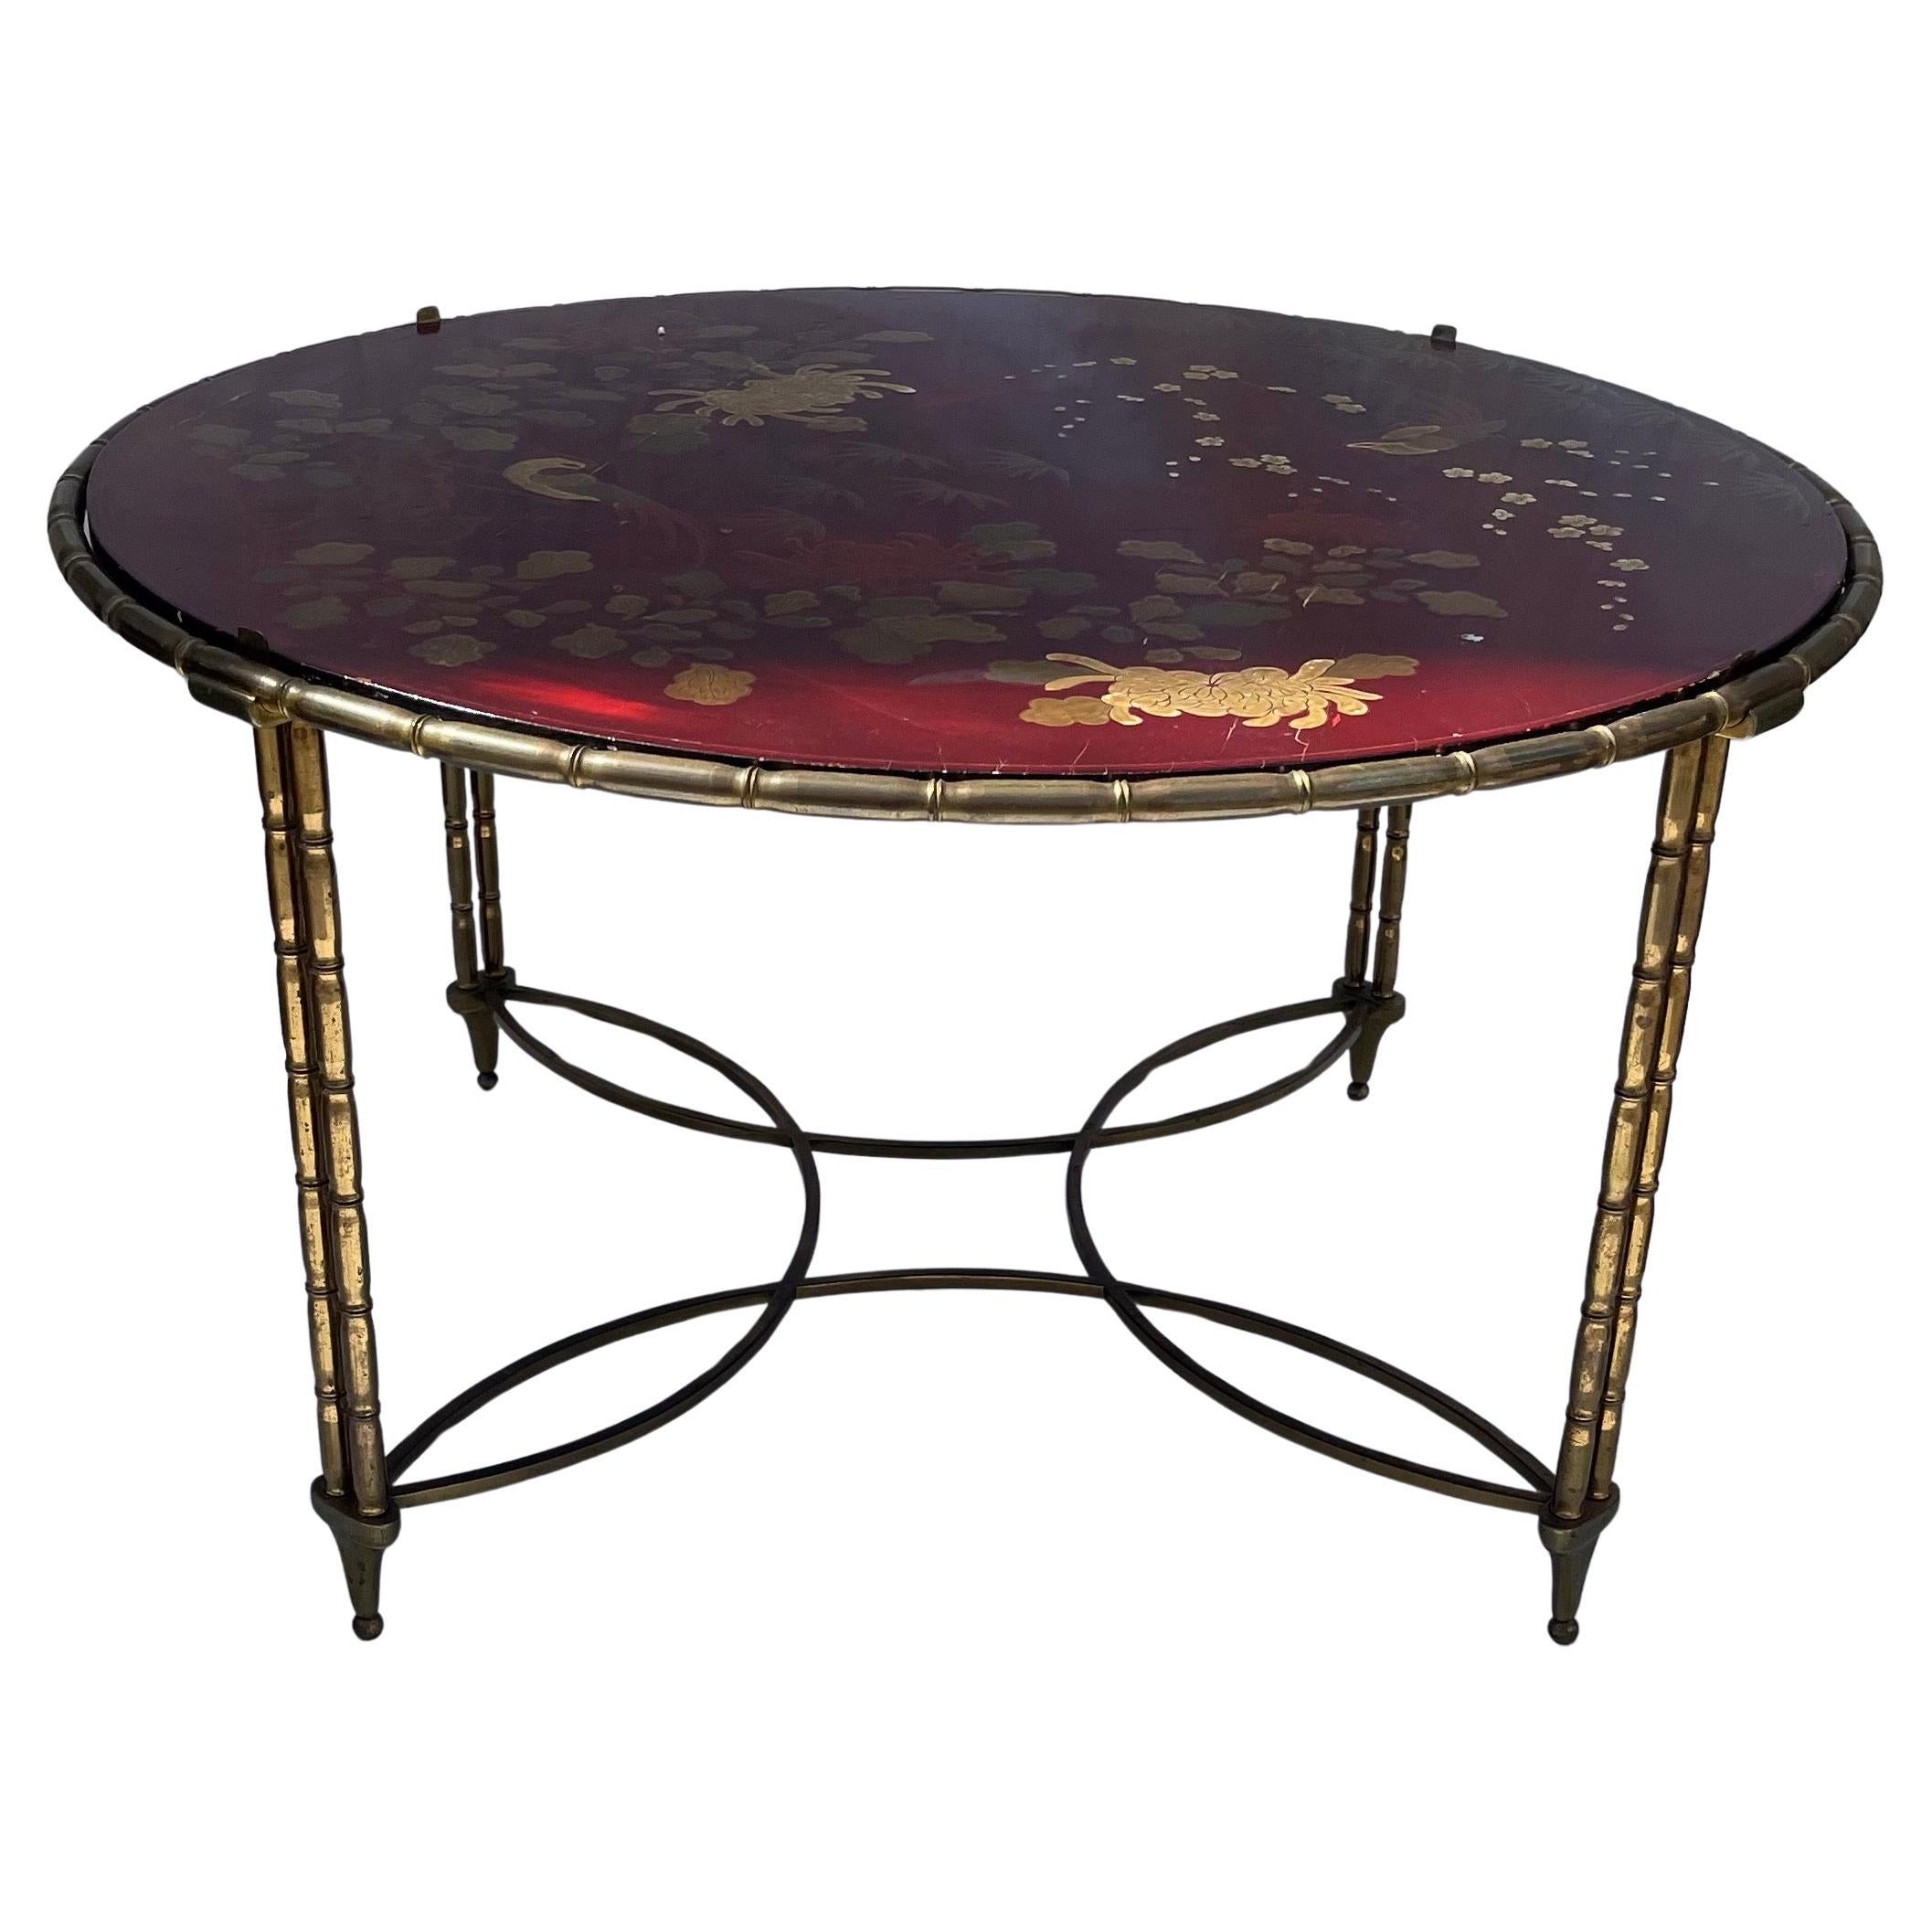 Wonderful Maison Bagues Round Chinoiserie Red Lacquer Bamboo Bronze Coffee Table